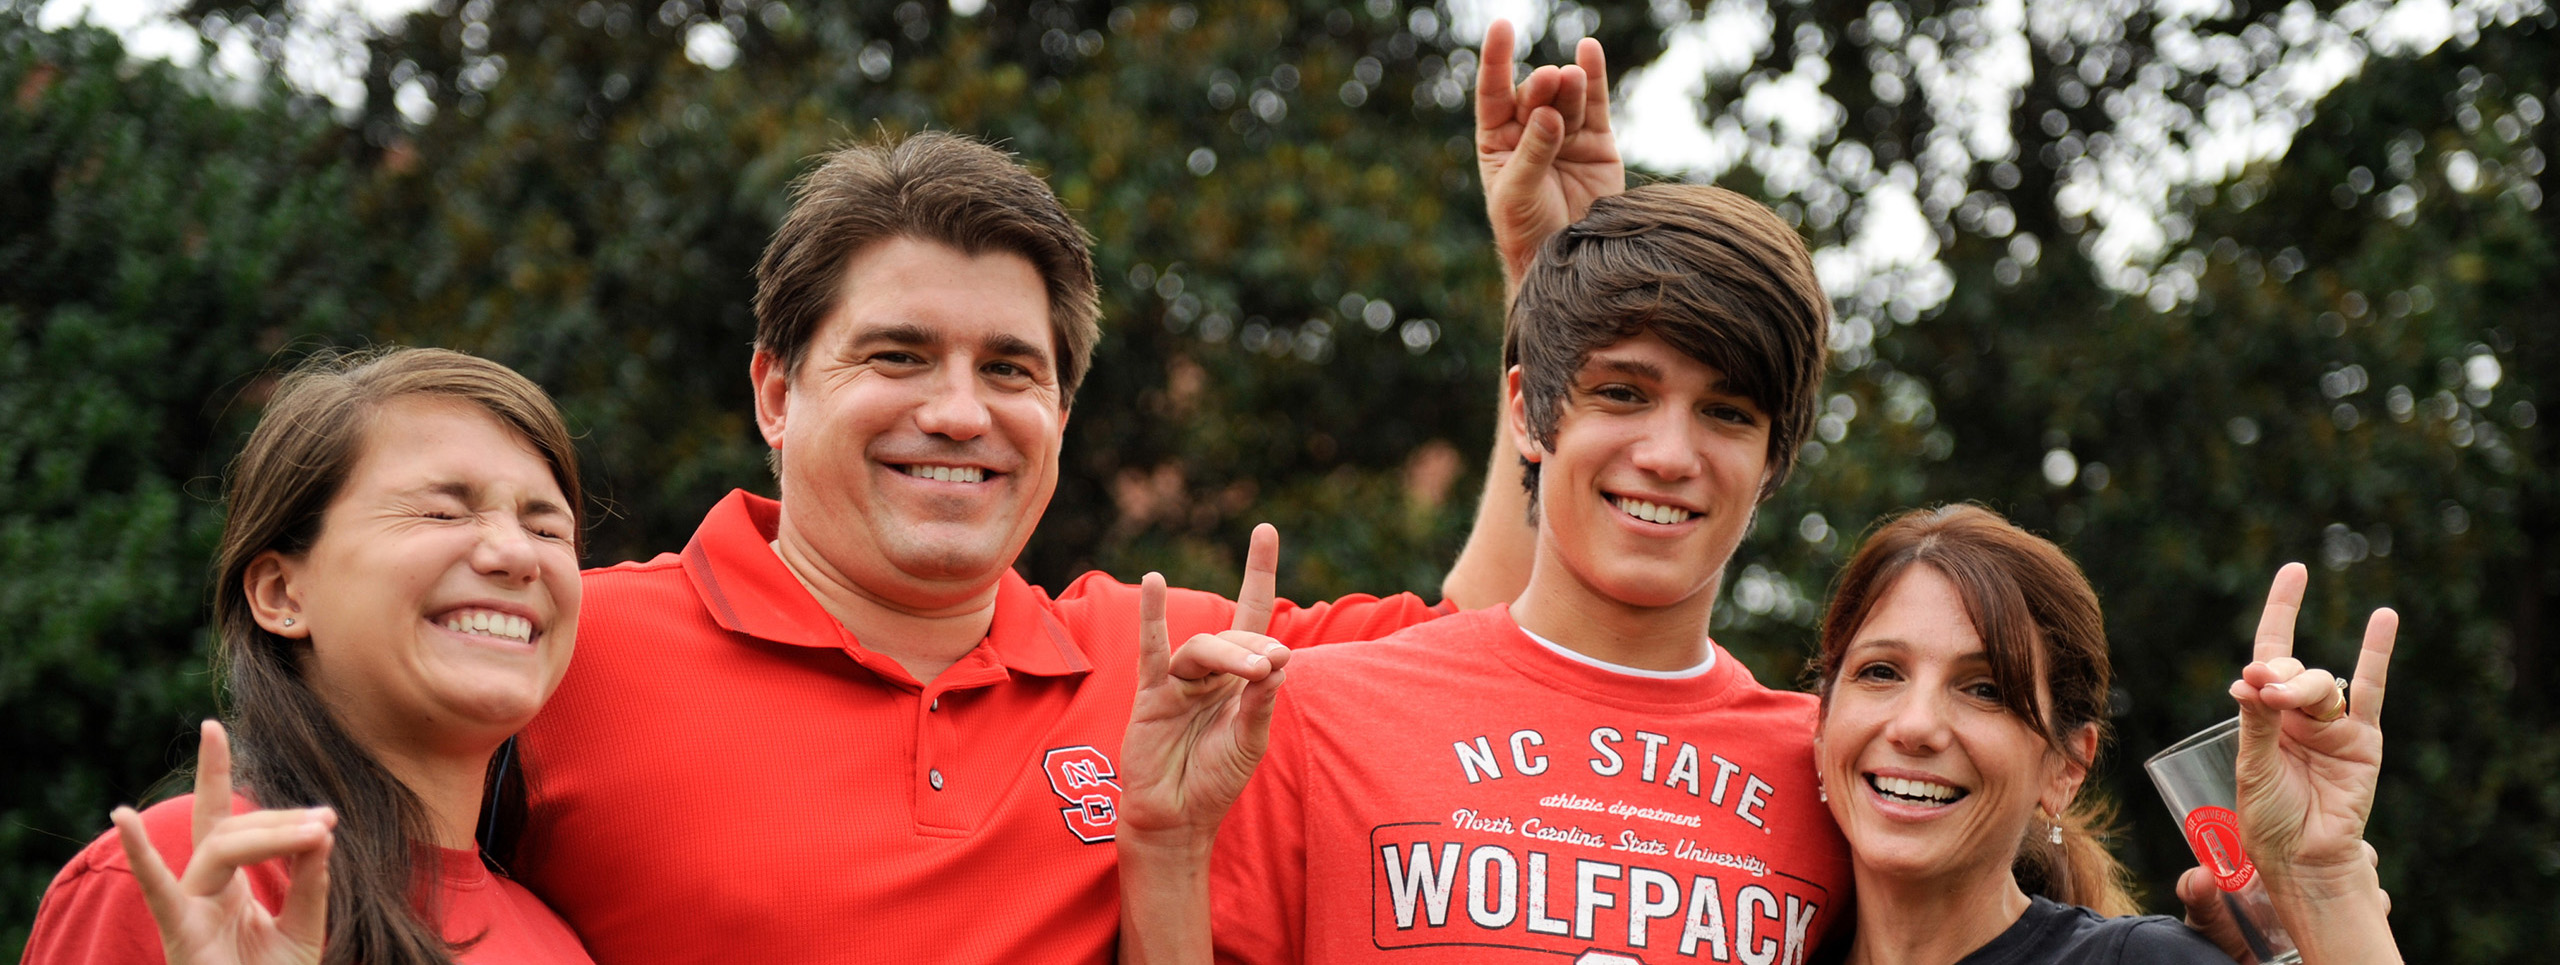 A current NC State student and their family, smiling and throwing wolfies.